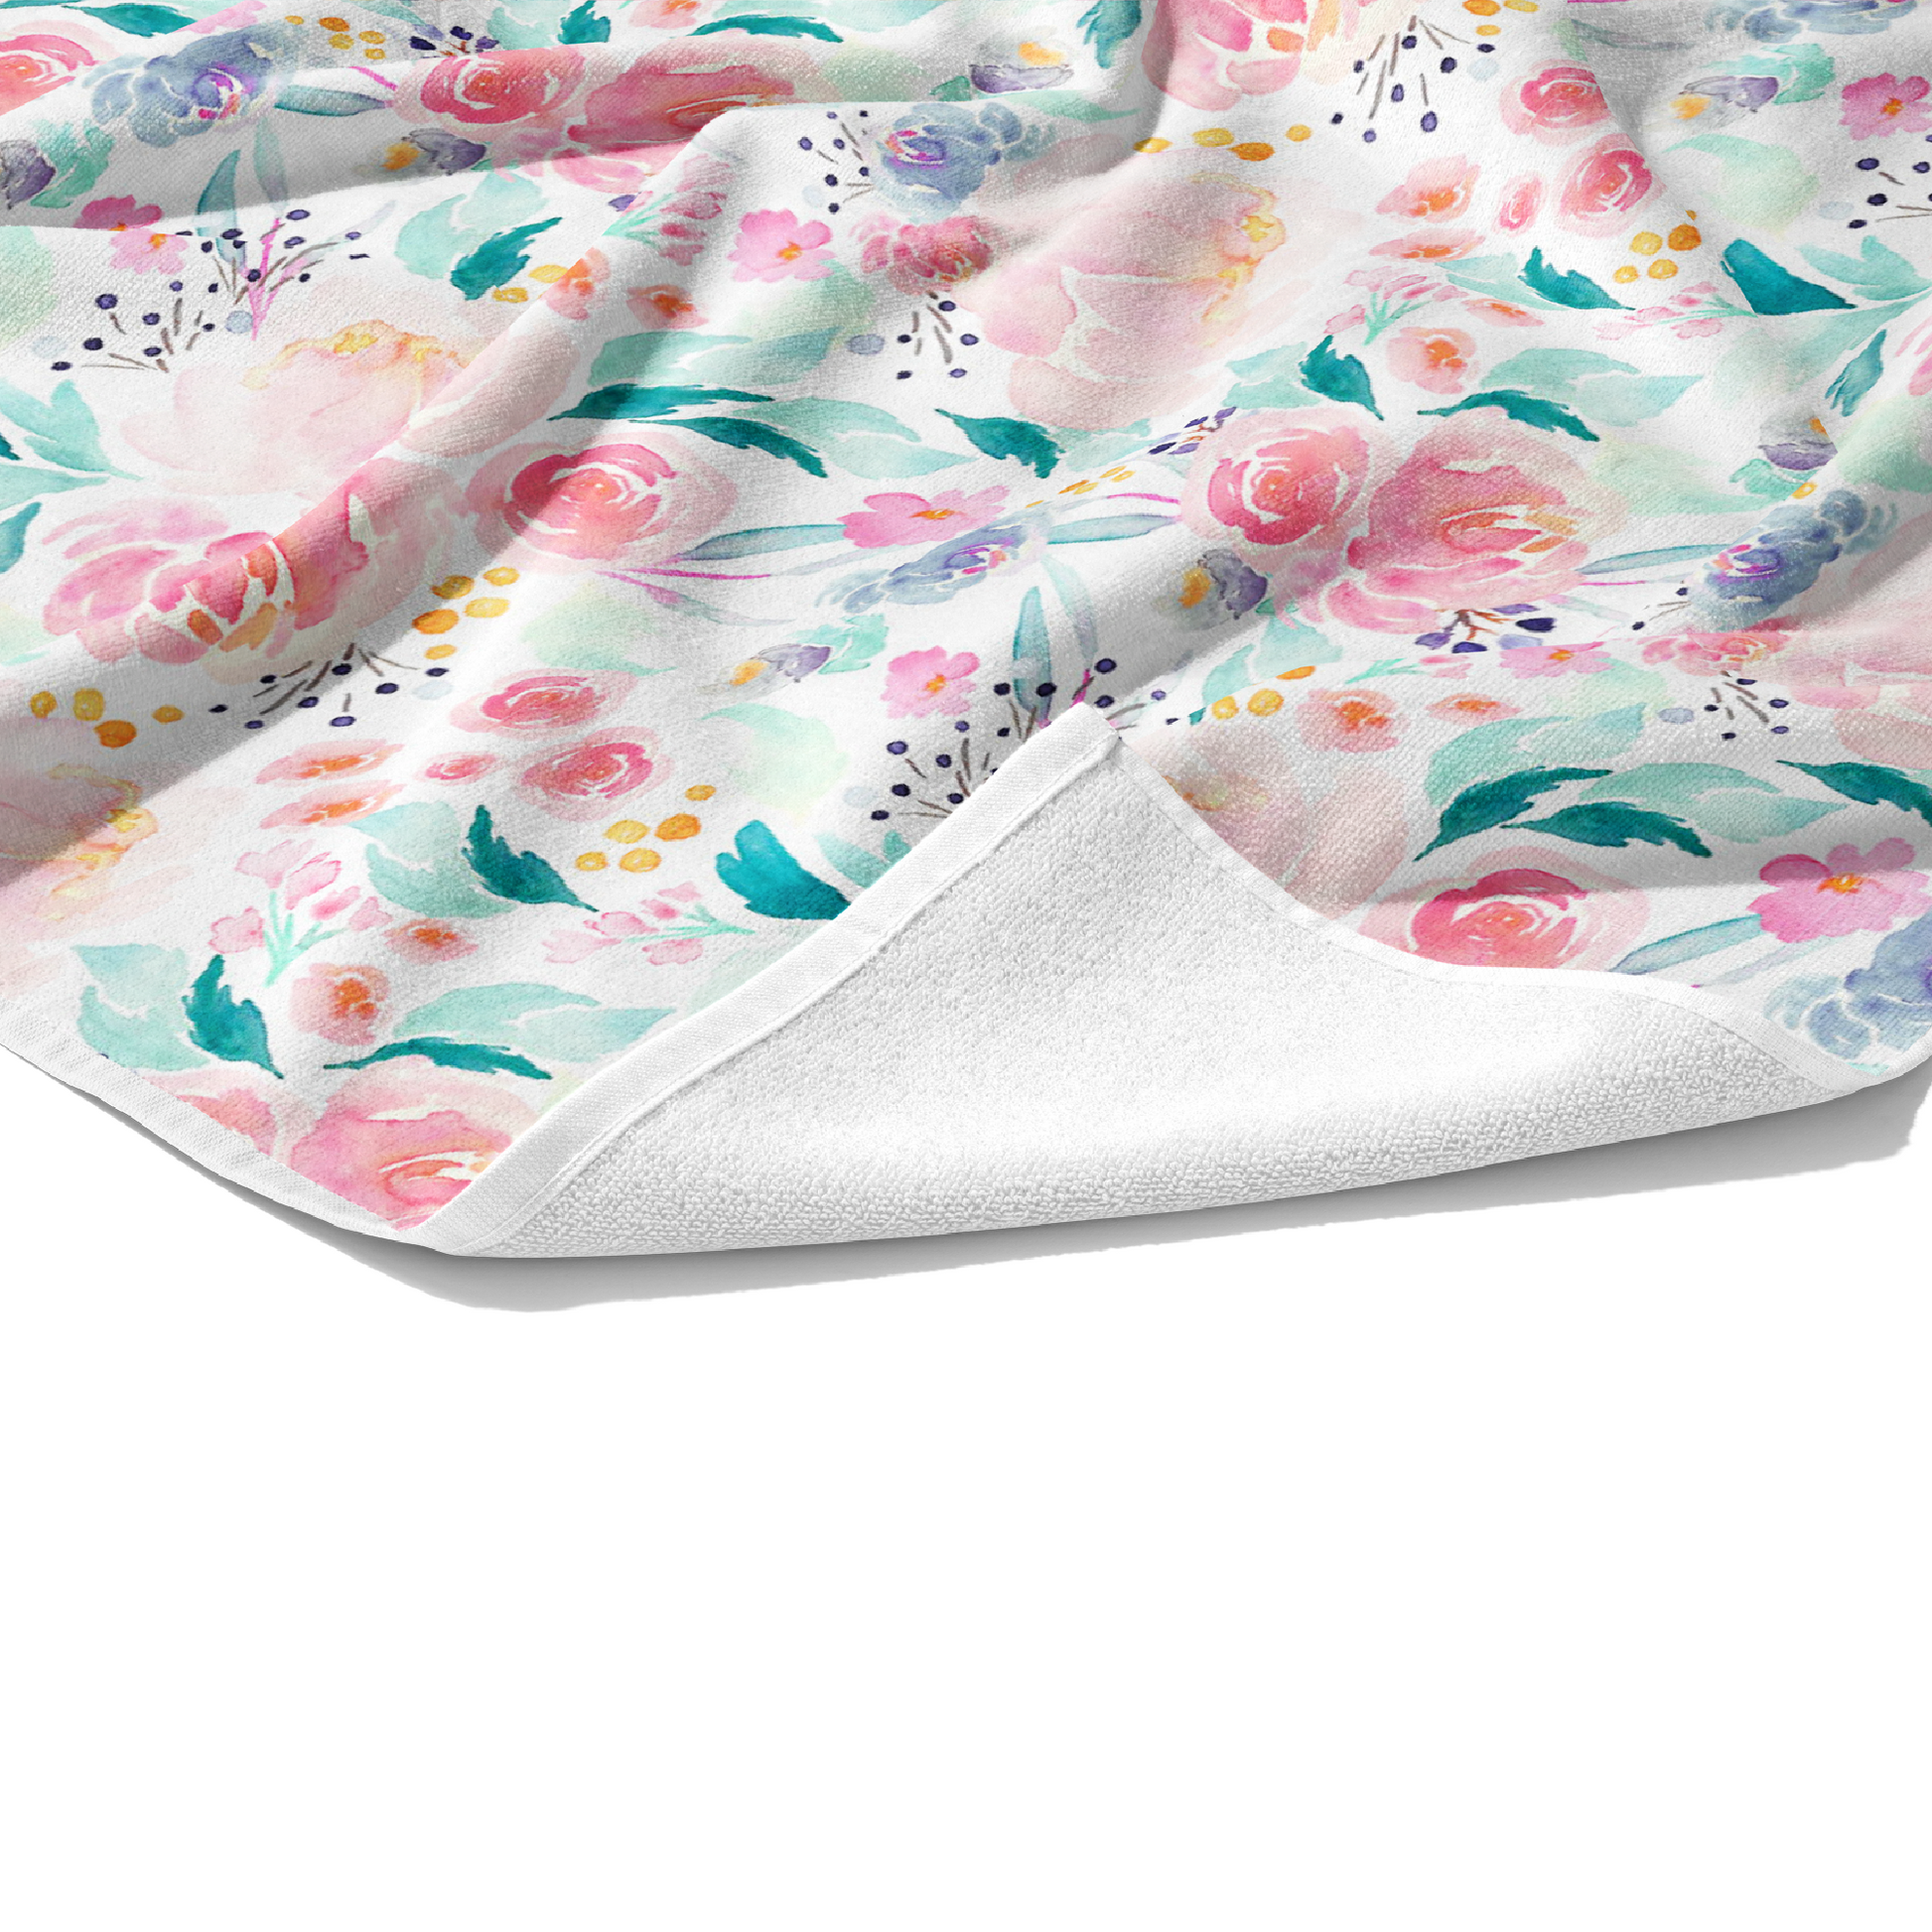 Plush white cotton customizable towel with aqua and pink watercolor floral patterned towel.